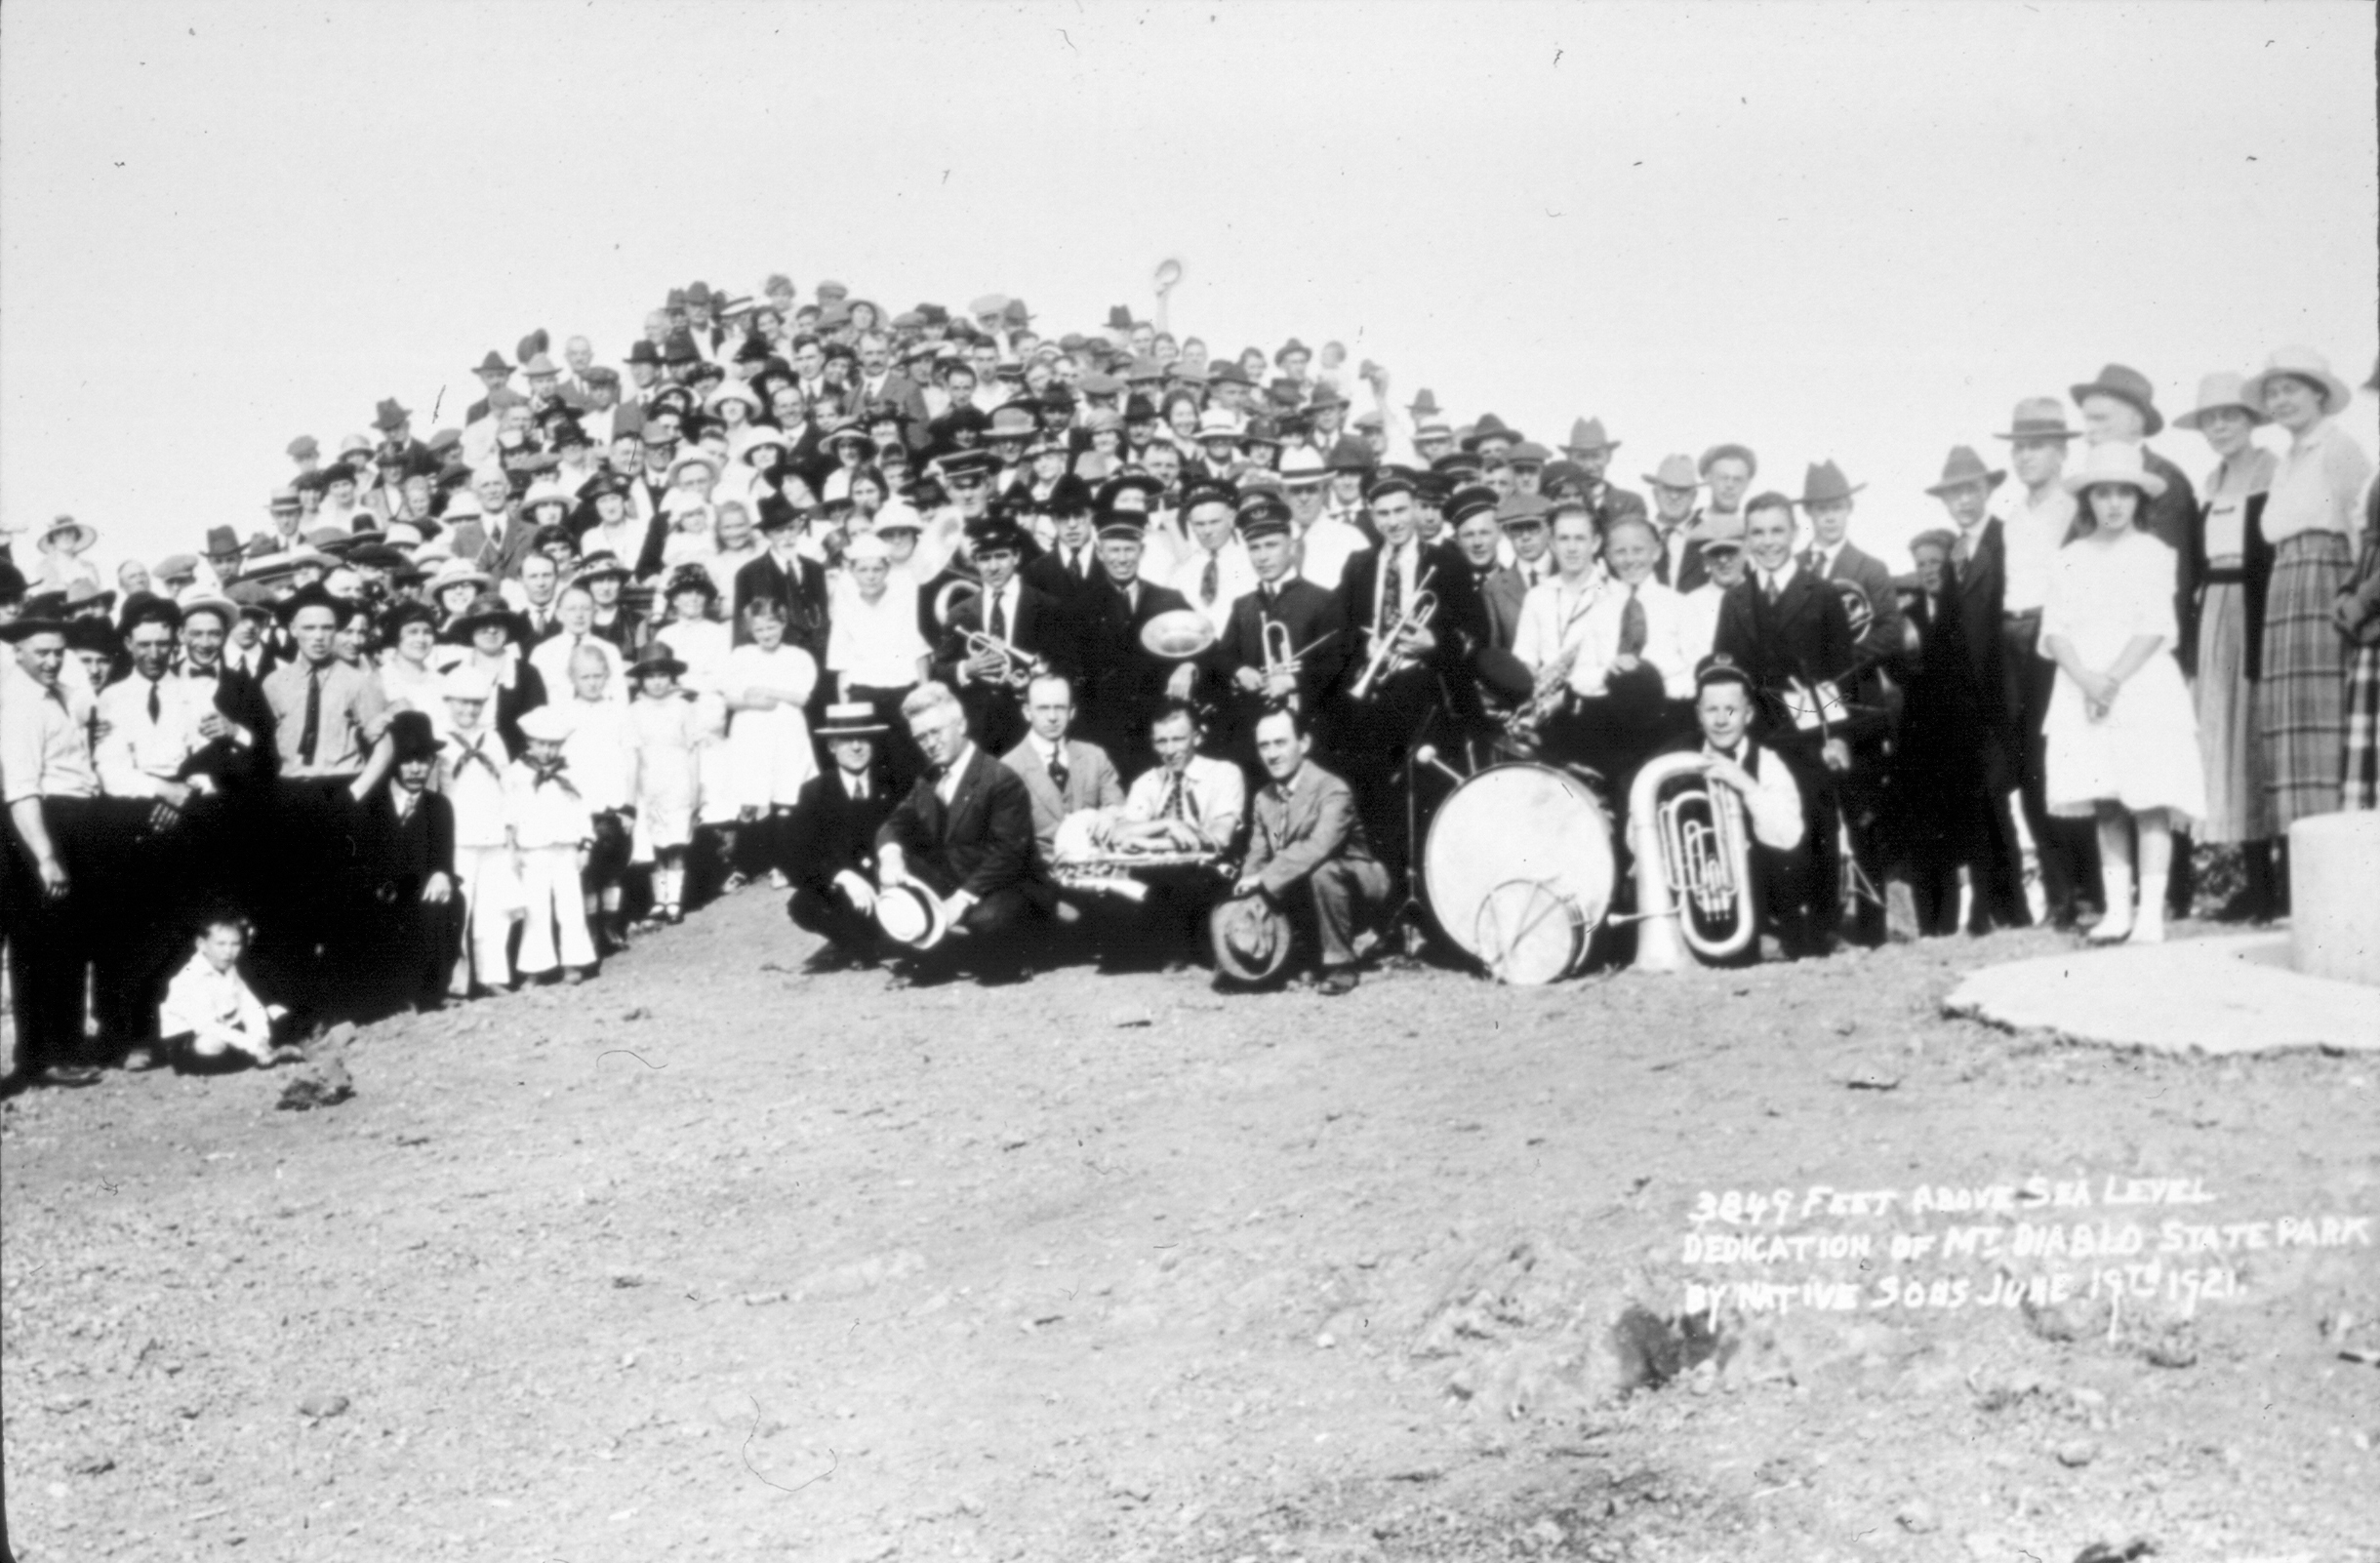 People at the summit of mount diablo, celebrating the dedication.